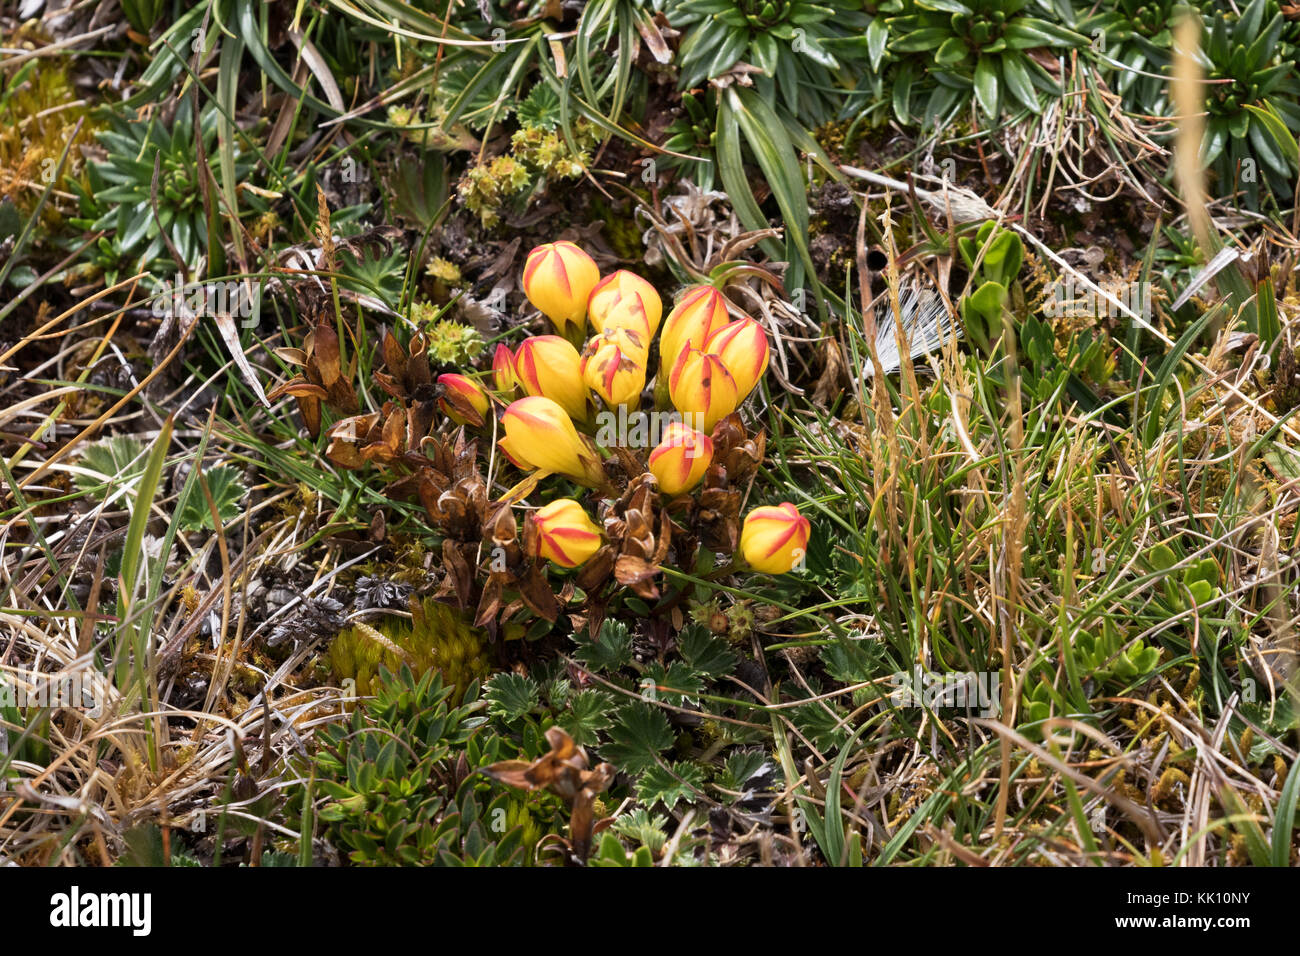 Gentianella hirculus, endangered species of plant confined to Ecuador, producing red and yellow flowers; El Cajas National Park, Ecuador South America Stock Photo